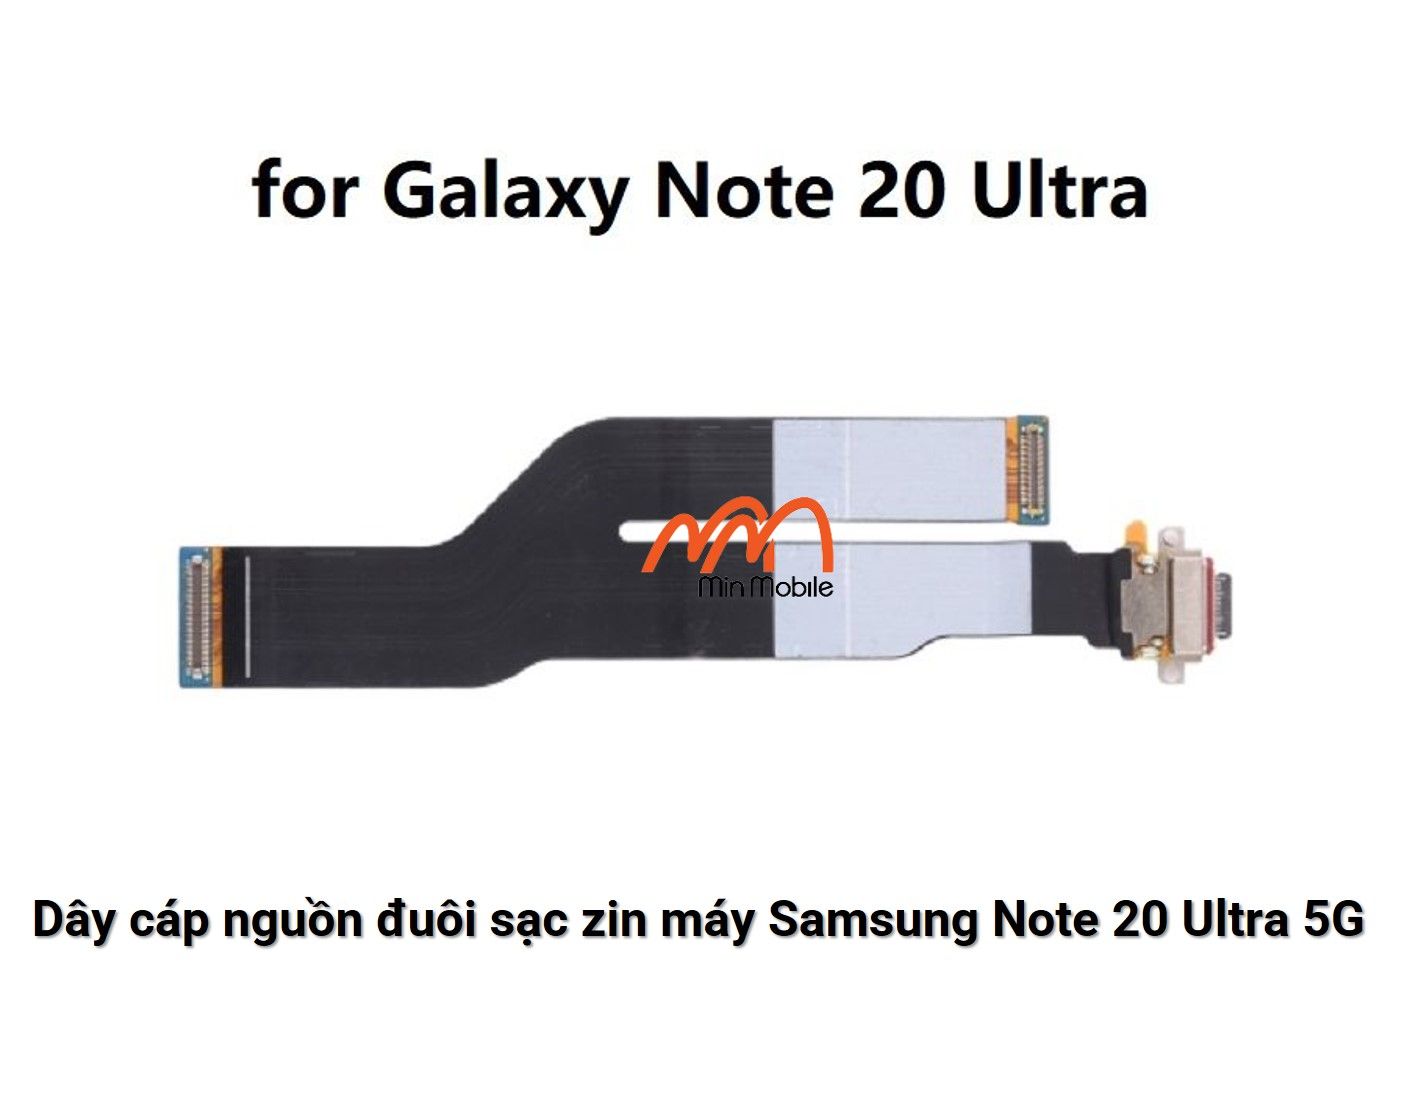 day-cap-nguon-duoi-sac-zin-may-samsung-note-20-ultra-5g-min-mobile-quan-1-tphcm